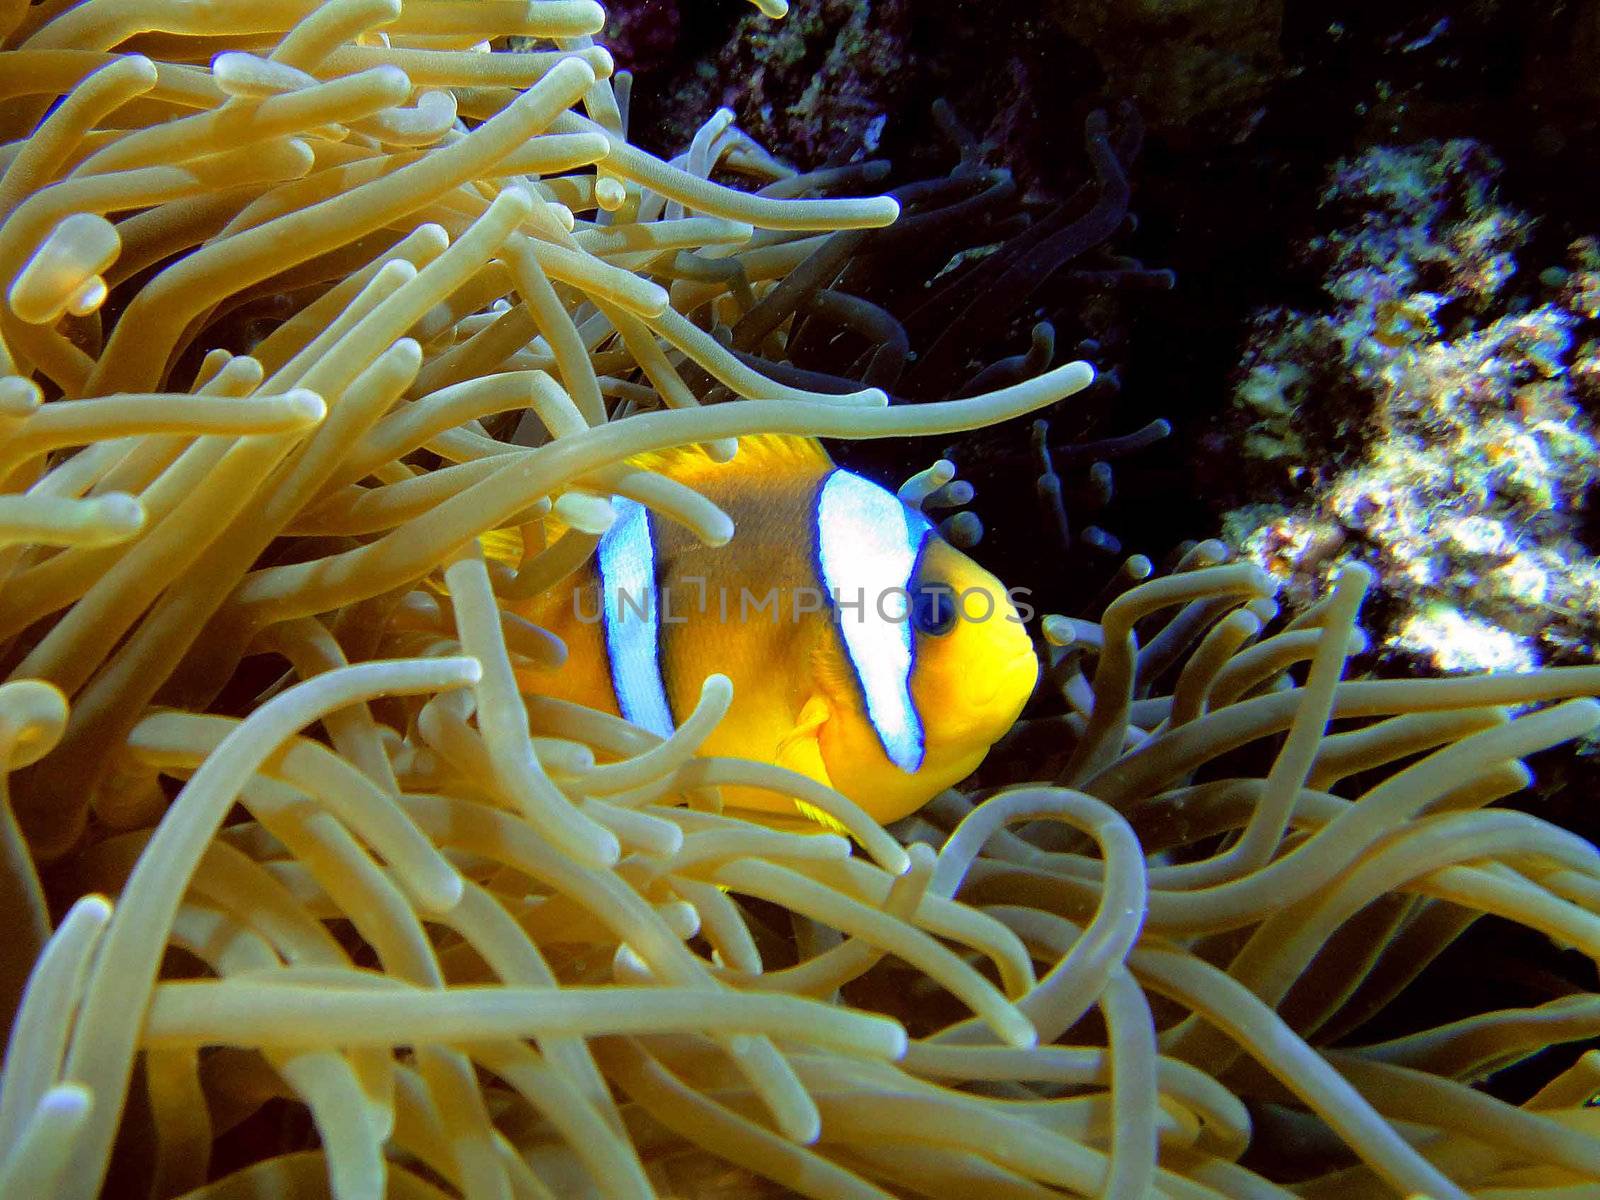 Amphiprion and his anemone, Red sea, Egypt